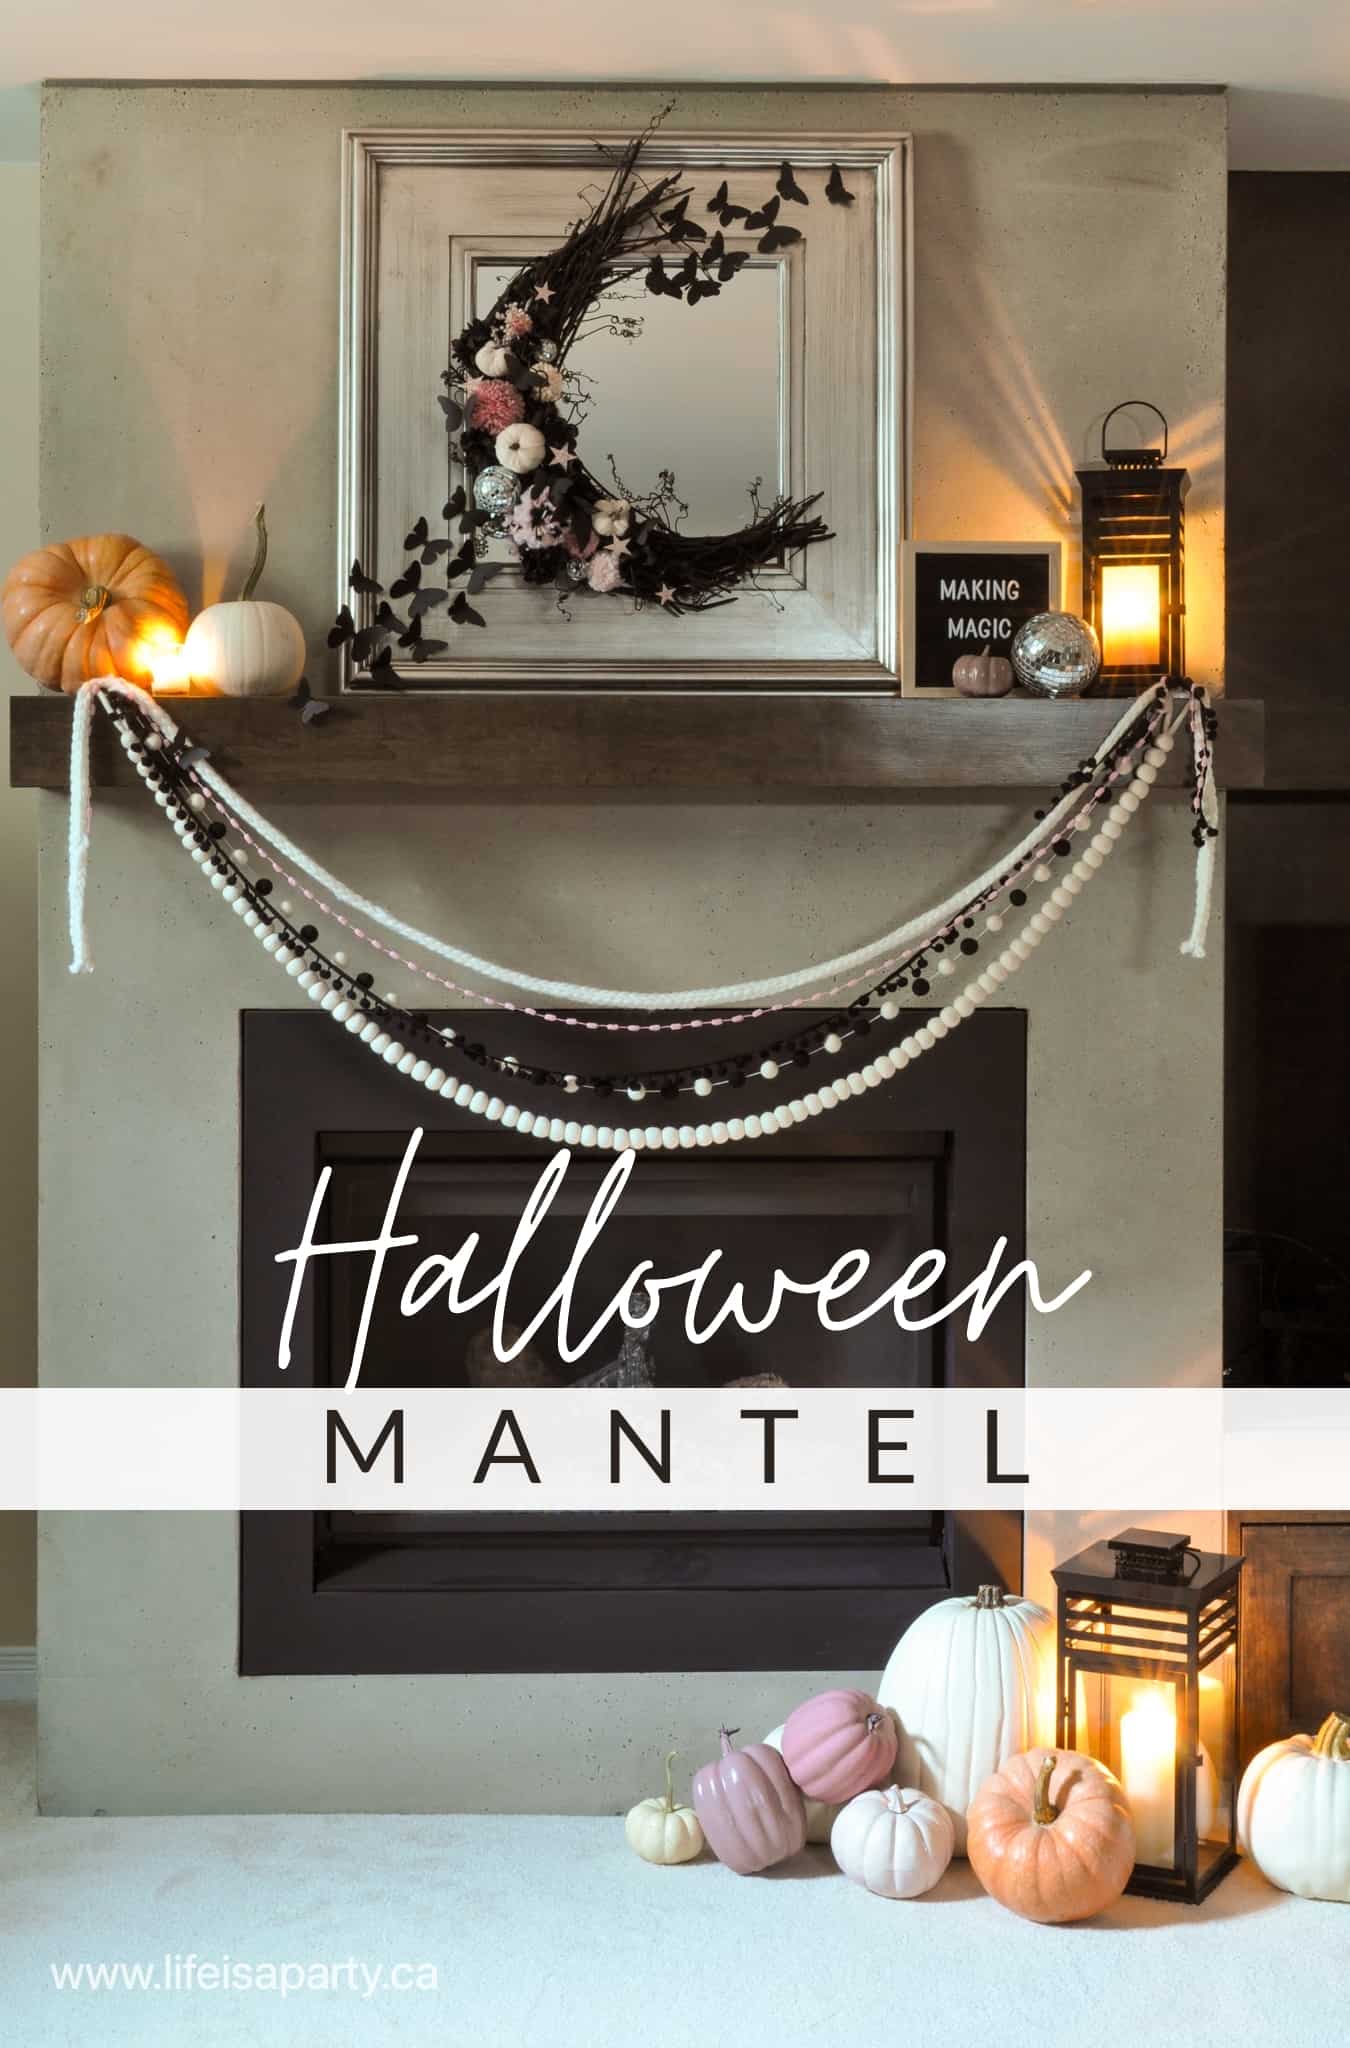 Halloween Mantel Decor: a moon shaped wreath, and flying black butterflies with lots of pumpkins and lanterns are perfect for Halloween.